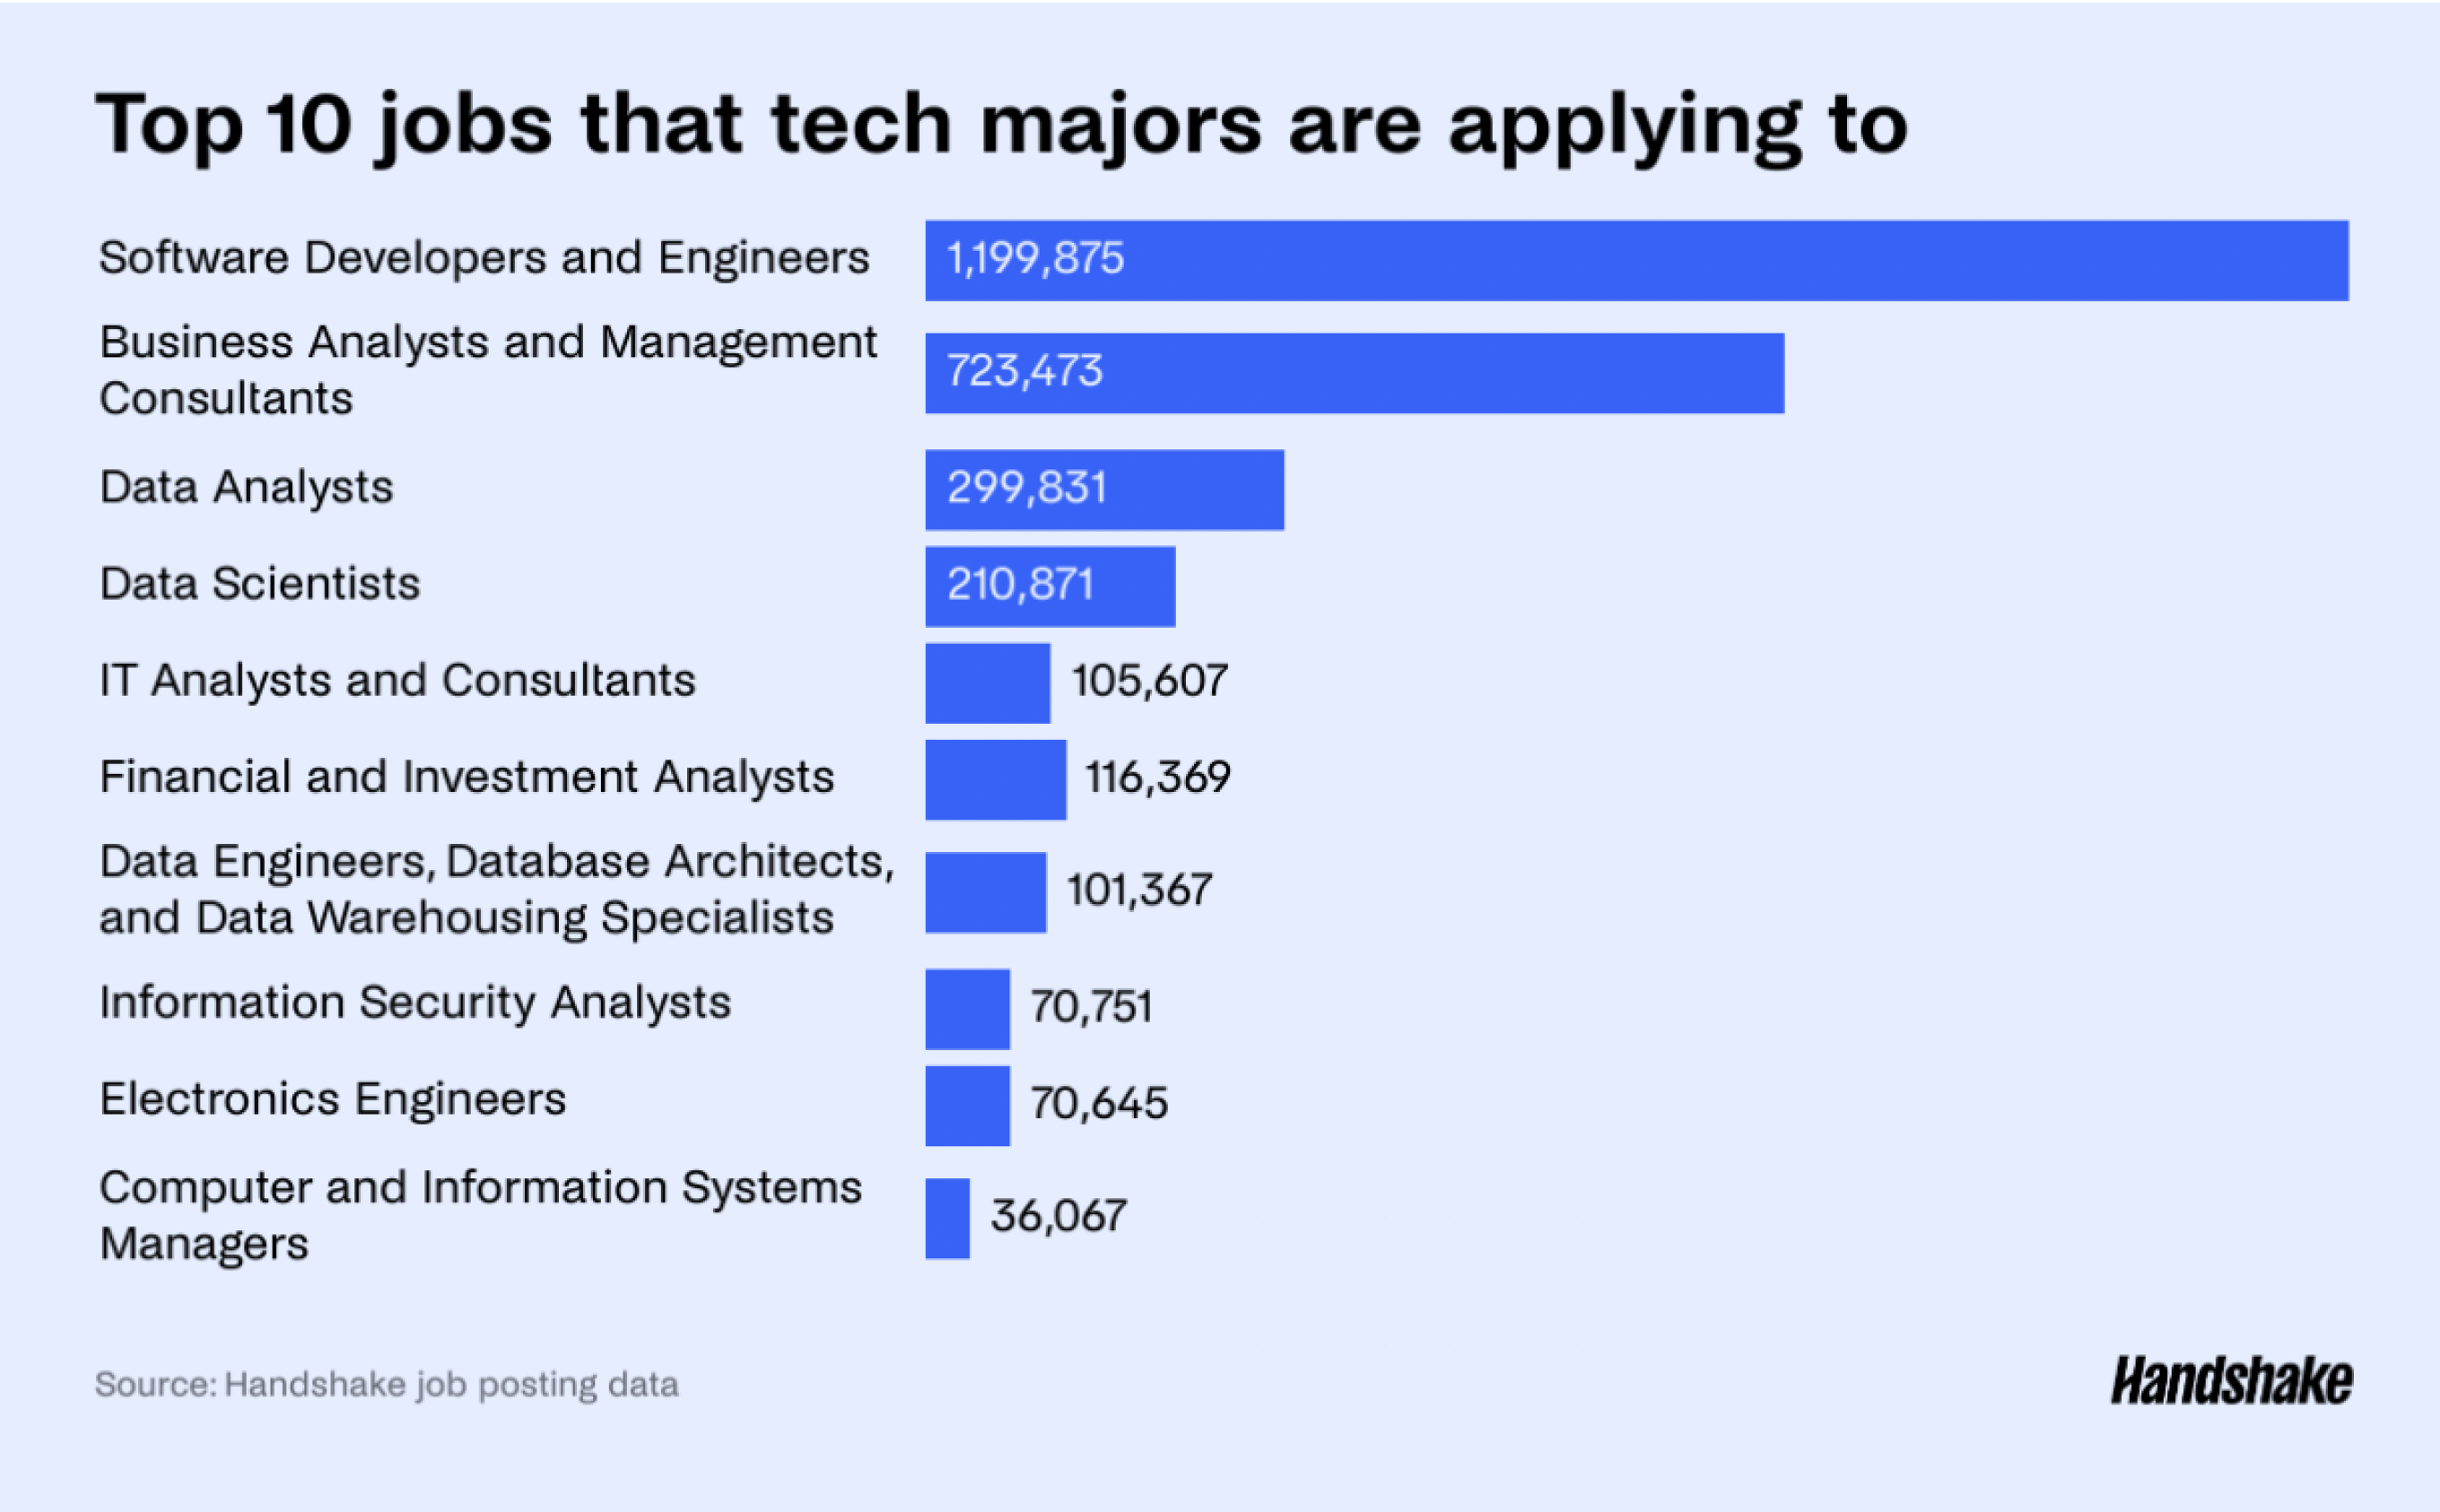 the top 10 jobs that tech majors are applying to